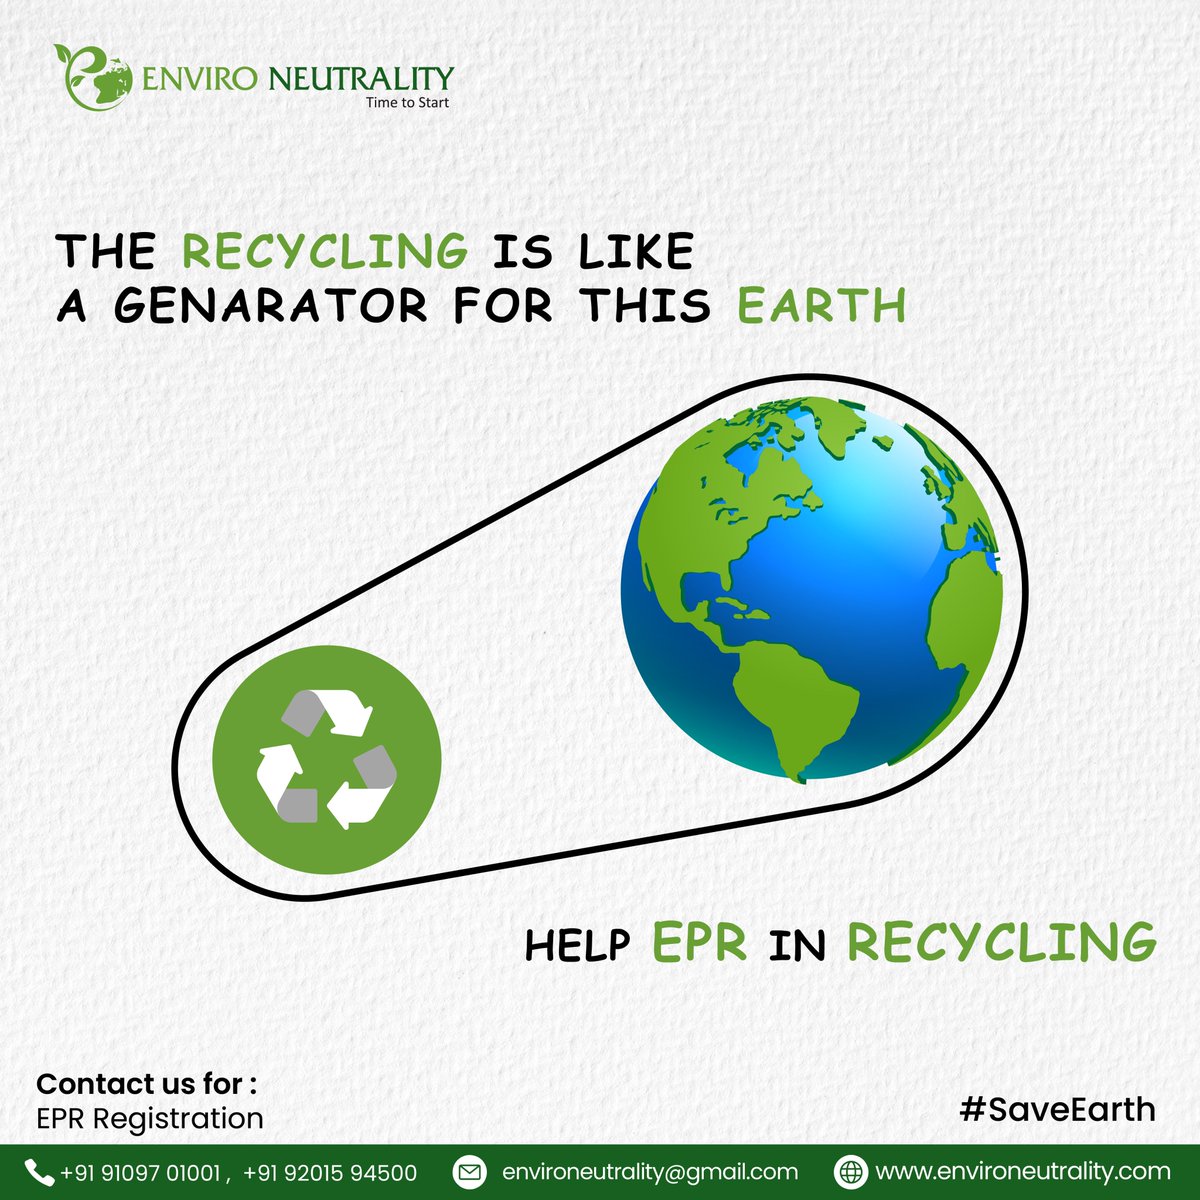 📷 Recycling is like a power generator for 📷!
#RecycleForEarth #SustainableLiving #epr #ewaste #rubberwaste #plasticrecycling #carboncredits #environment #environeytrality #swacchatasurvekshanmission #globalwarming #circulareconomy #CPCB #eprcompliance